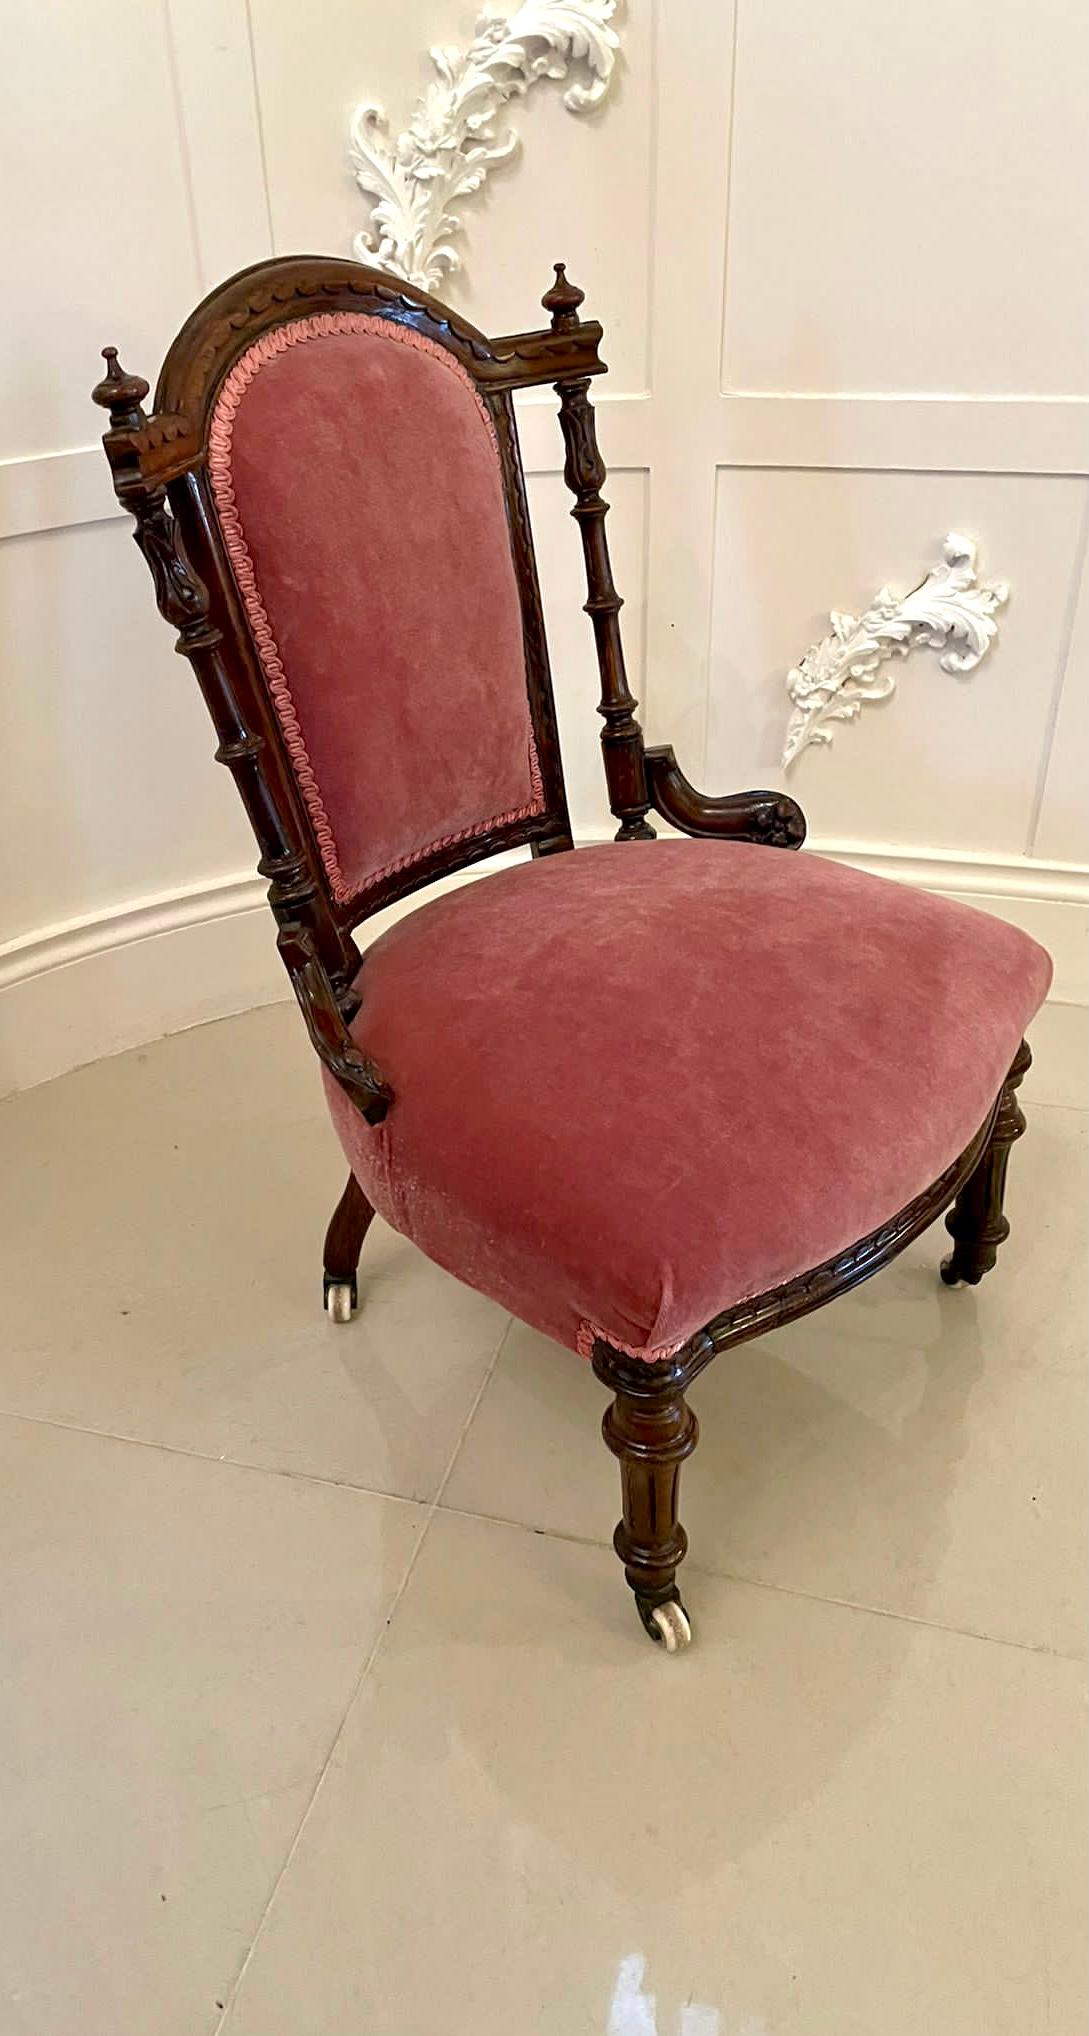 Quality antique Victorian walnut carved ladies chair having a quality solid carved walnut back with lovely shaped turned carved supports and raised on turned reeded legs to the front, out swept back legs with original castors.

We are able to